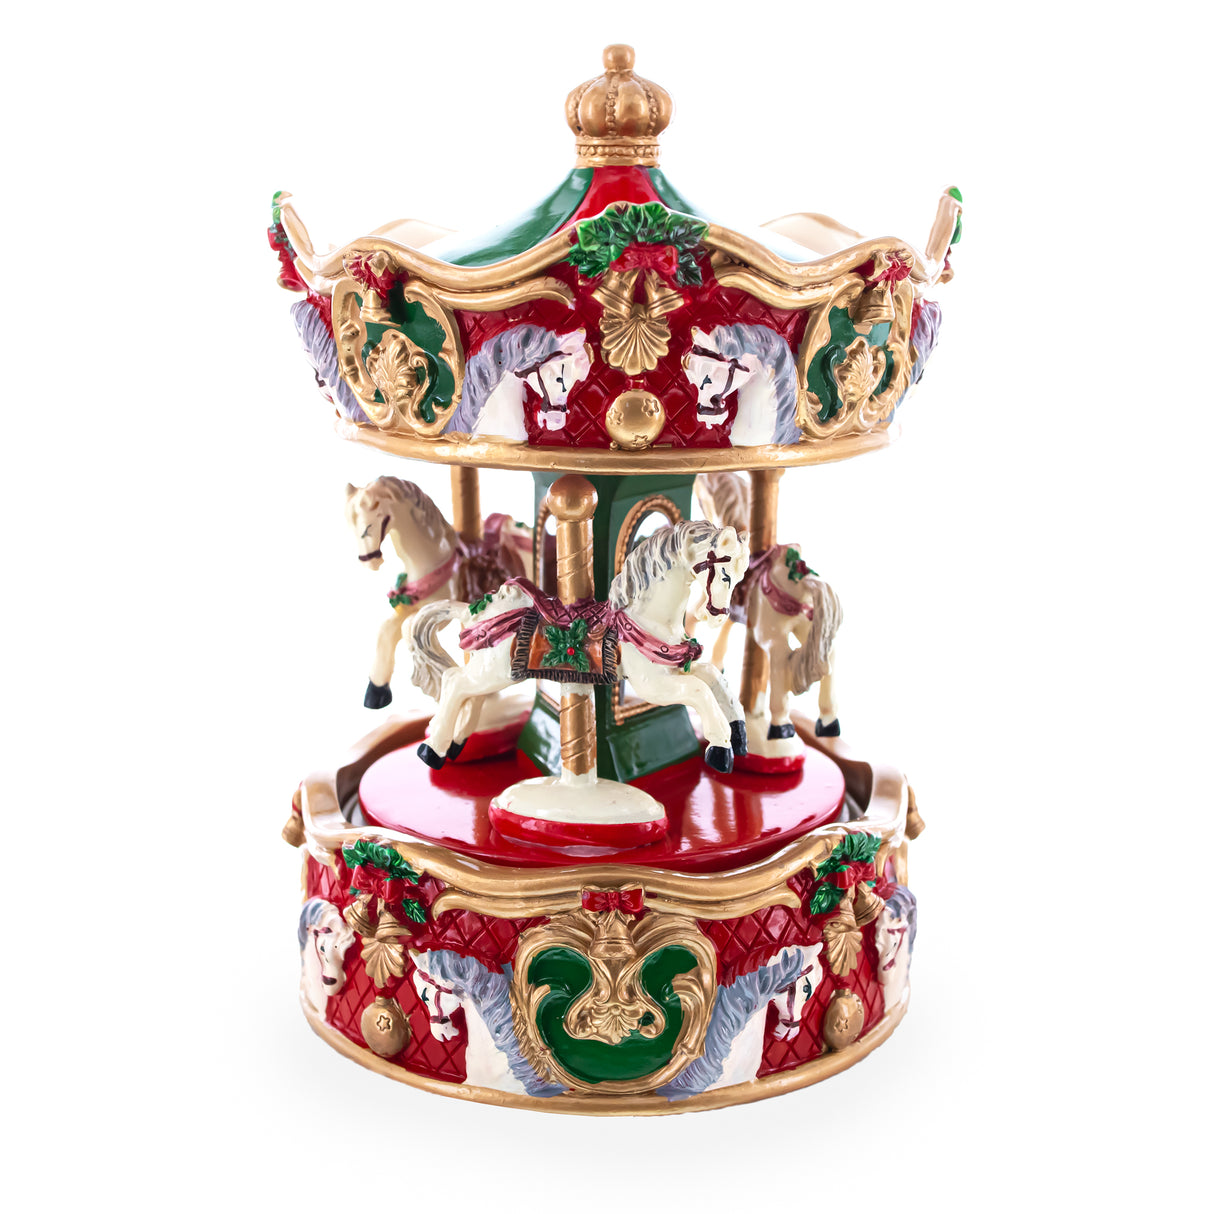 Resin Merry-Go-Round Melody: Musical Christmas Figurine with Spinning Carousel Horses in Multi color